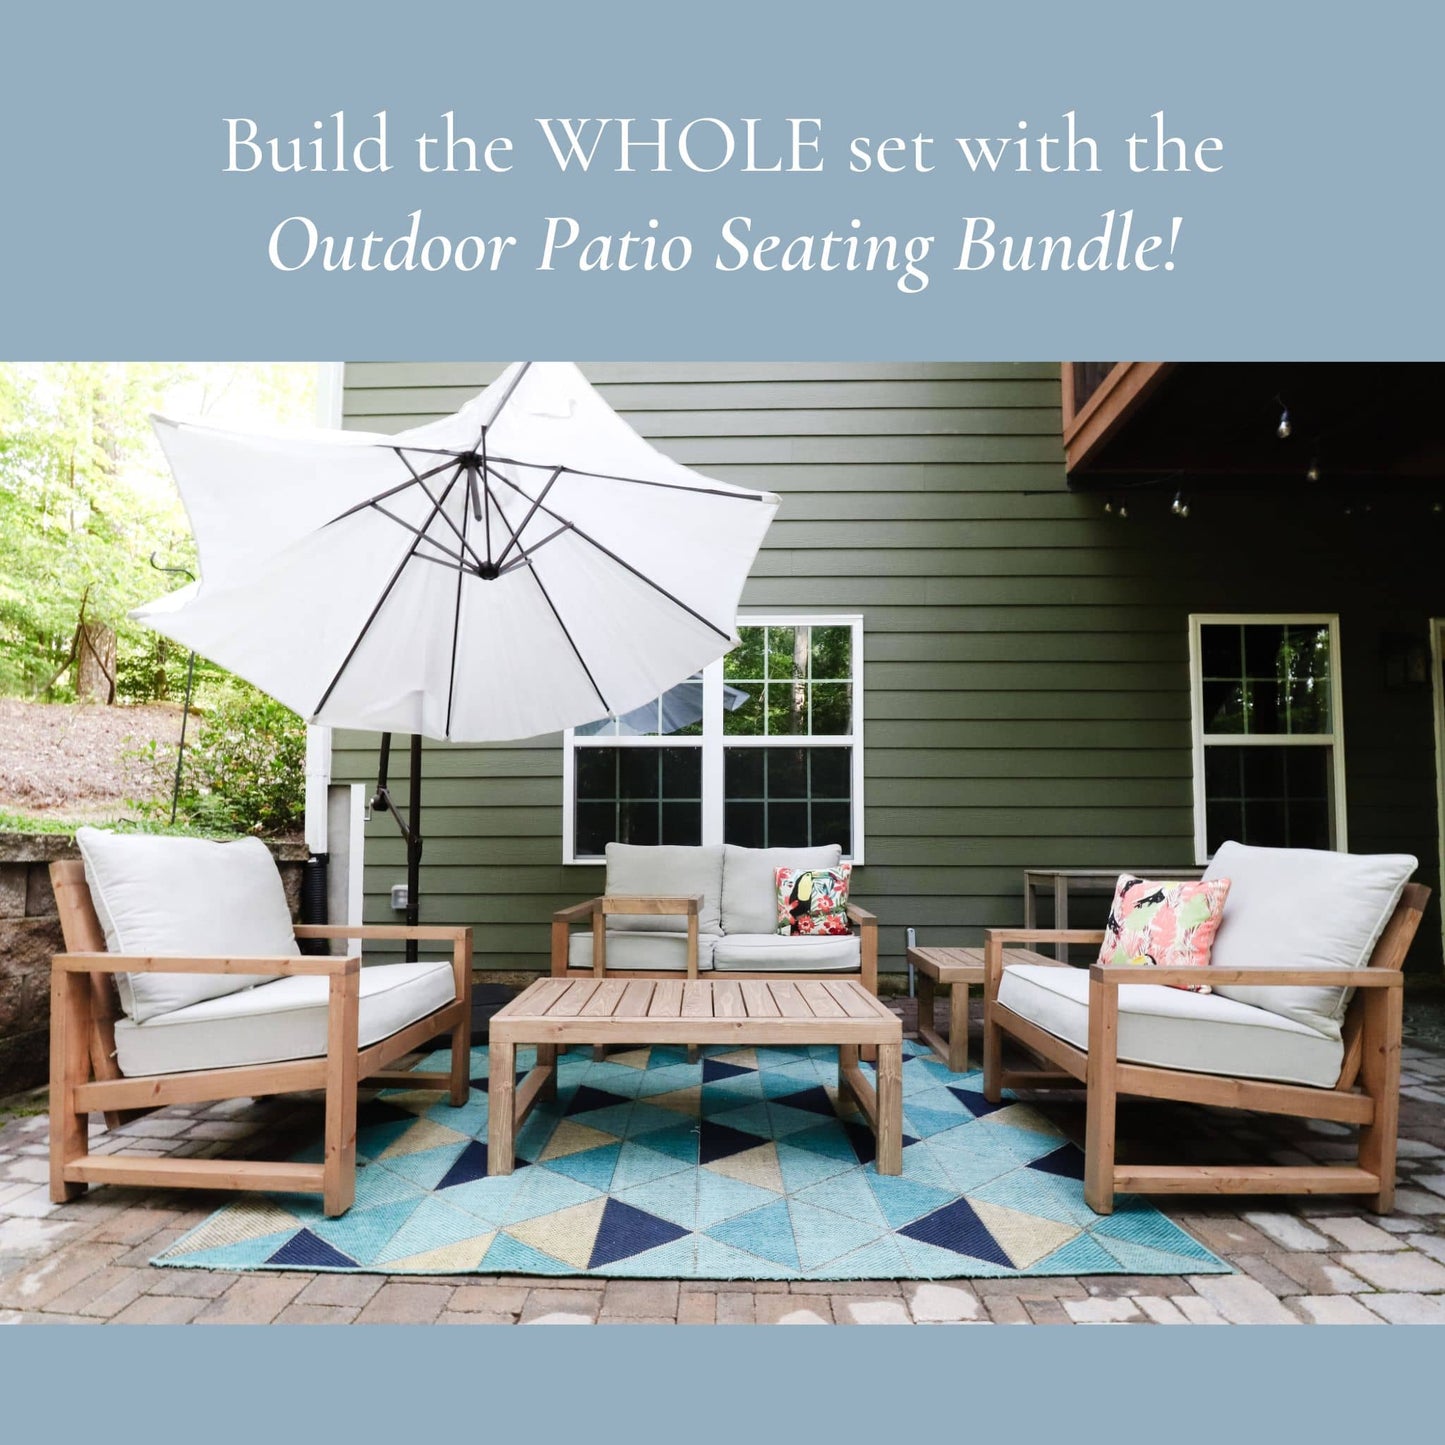 Outdoor C Side Table Printable Plans